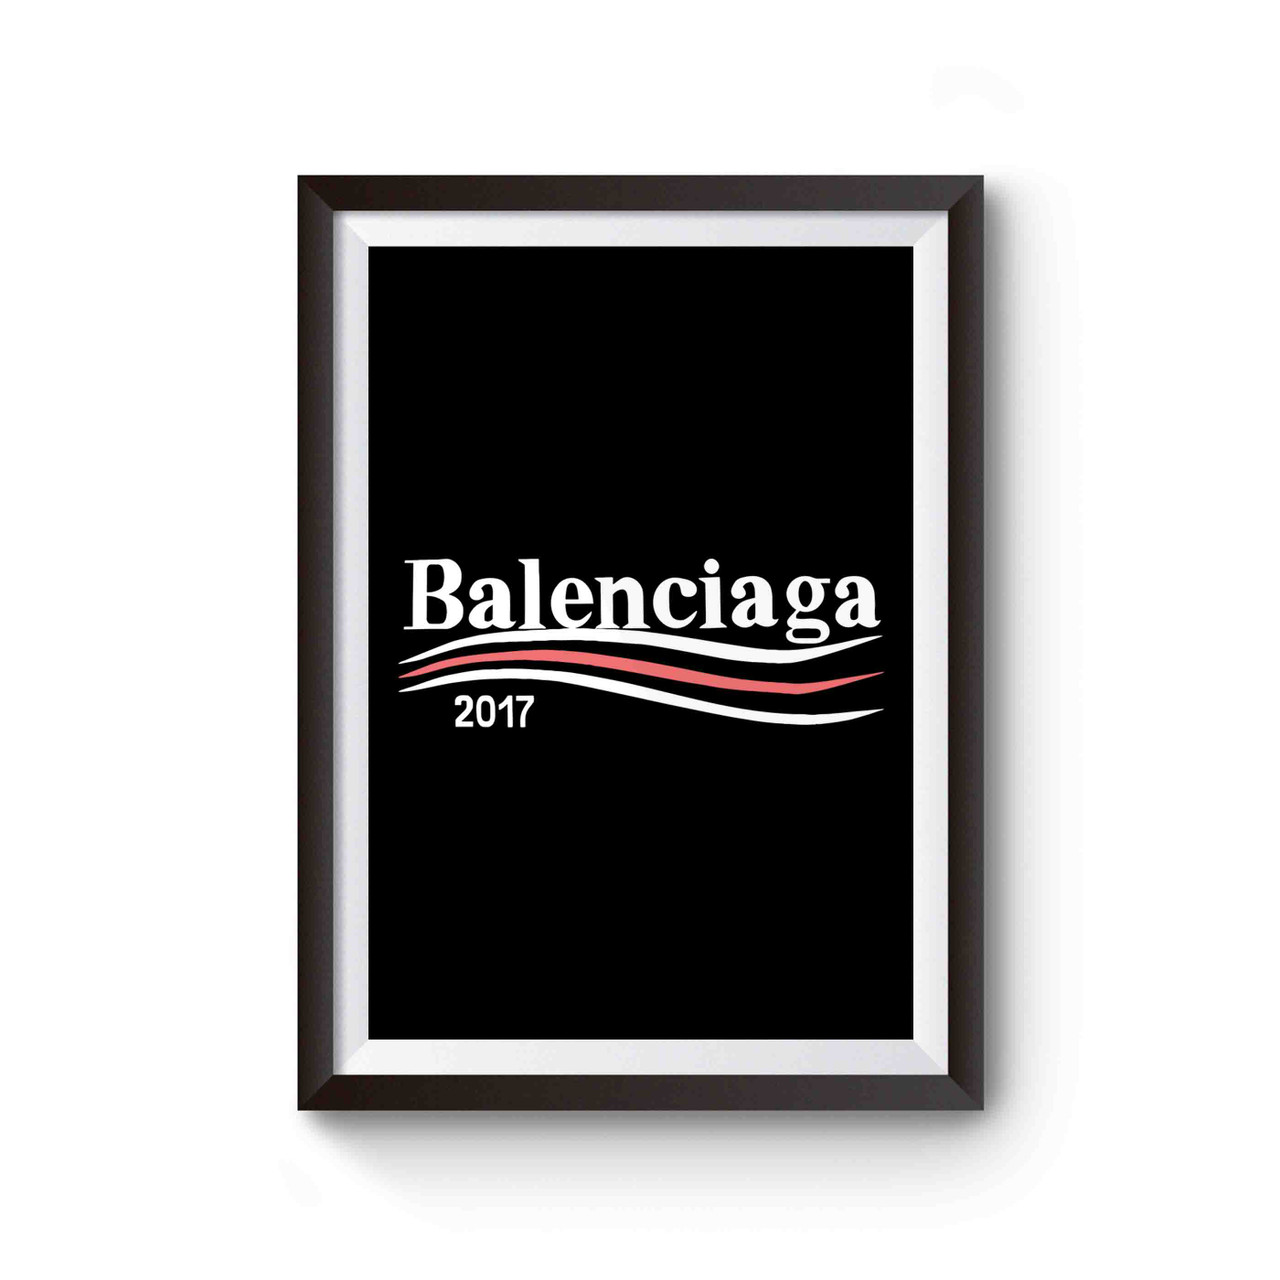 prompthunt Balenciaga advertising campaign poster